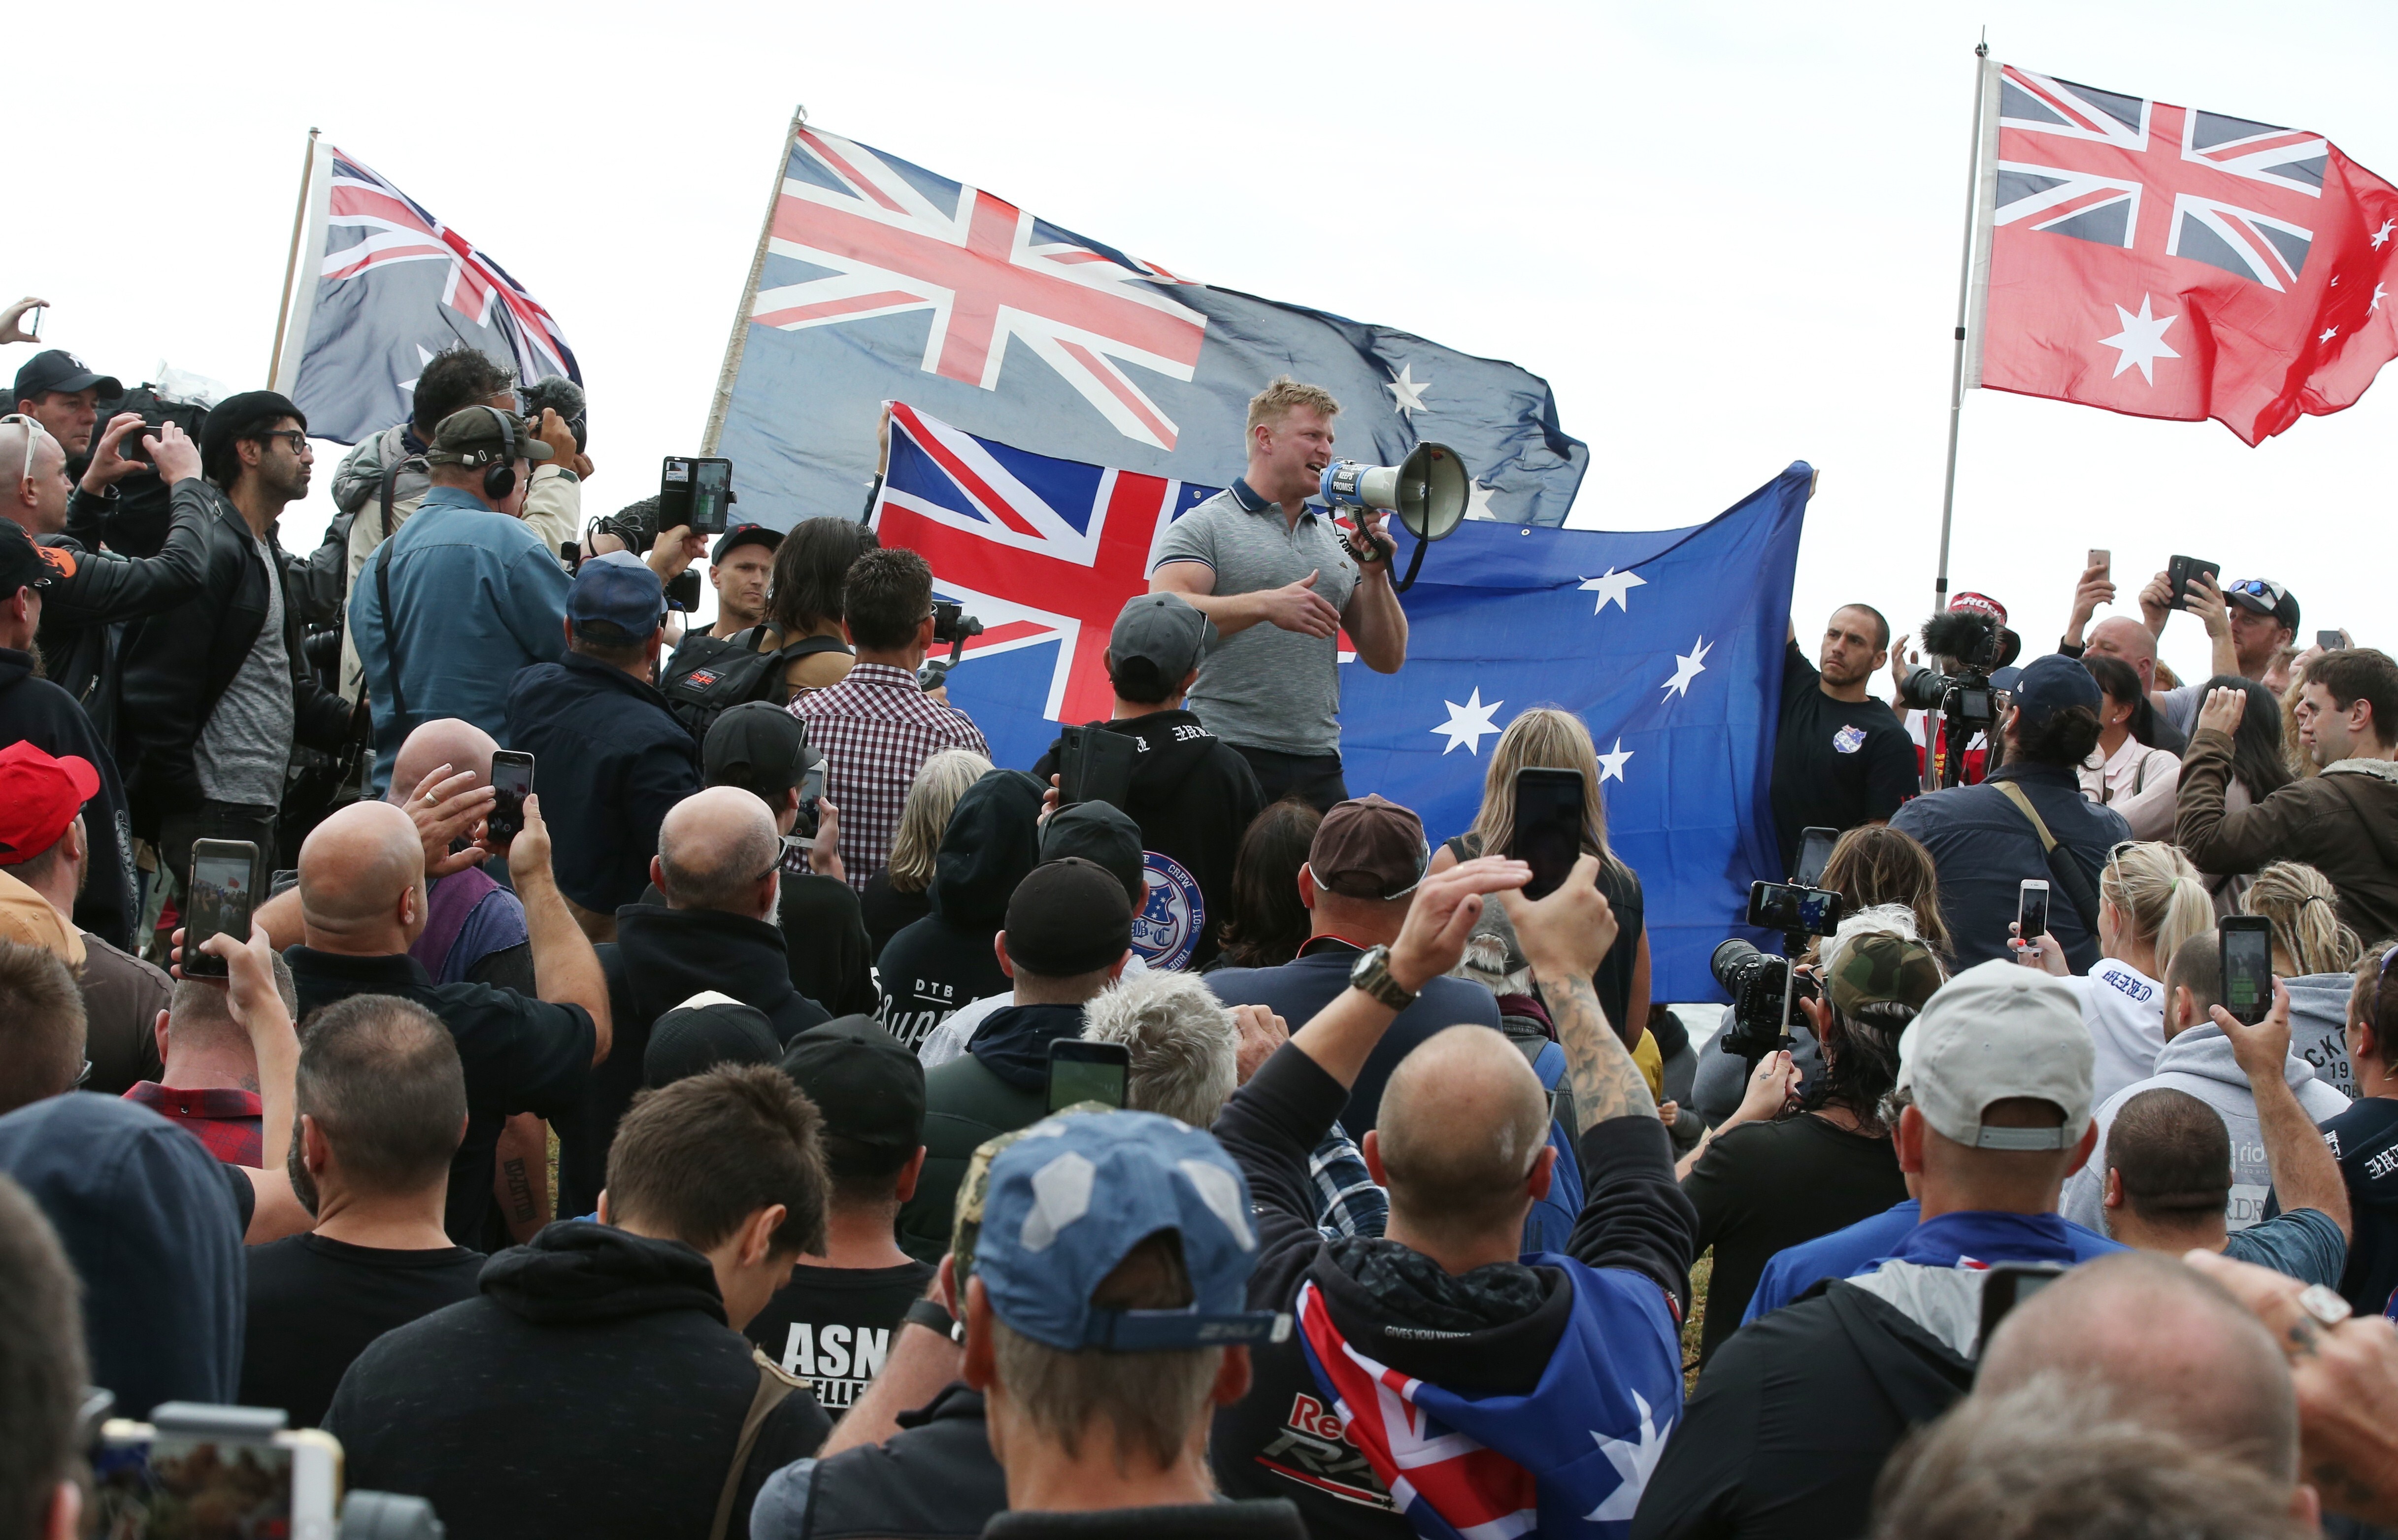 Australian far-right extremist Blair Cottrell talks to supporters at a nationalist rally in Melbourne in January 2019. Photo: EPA